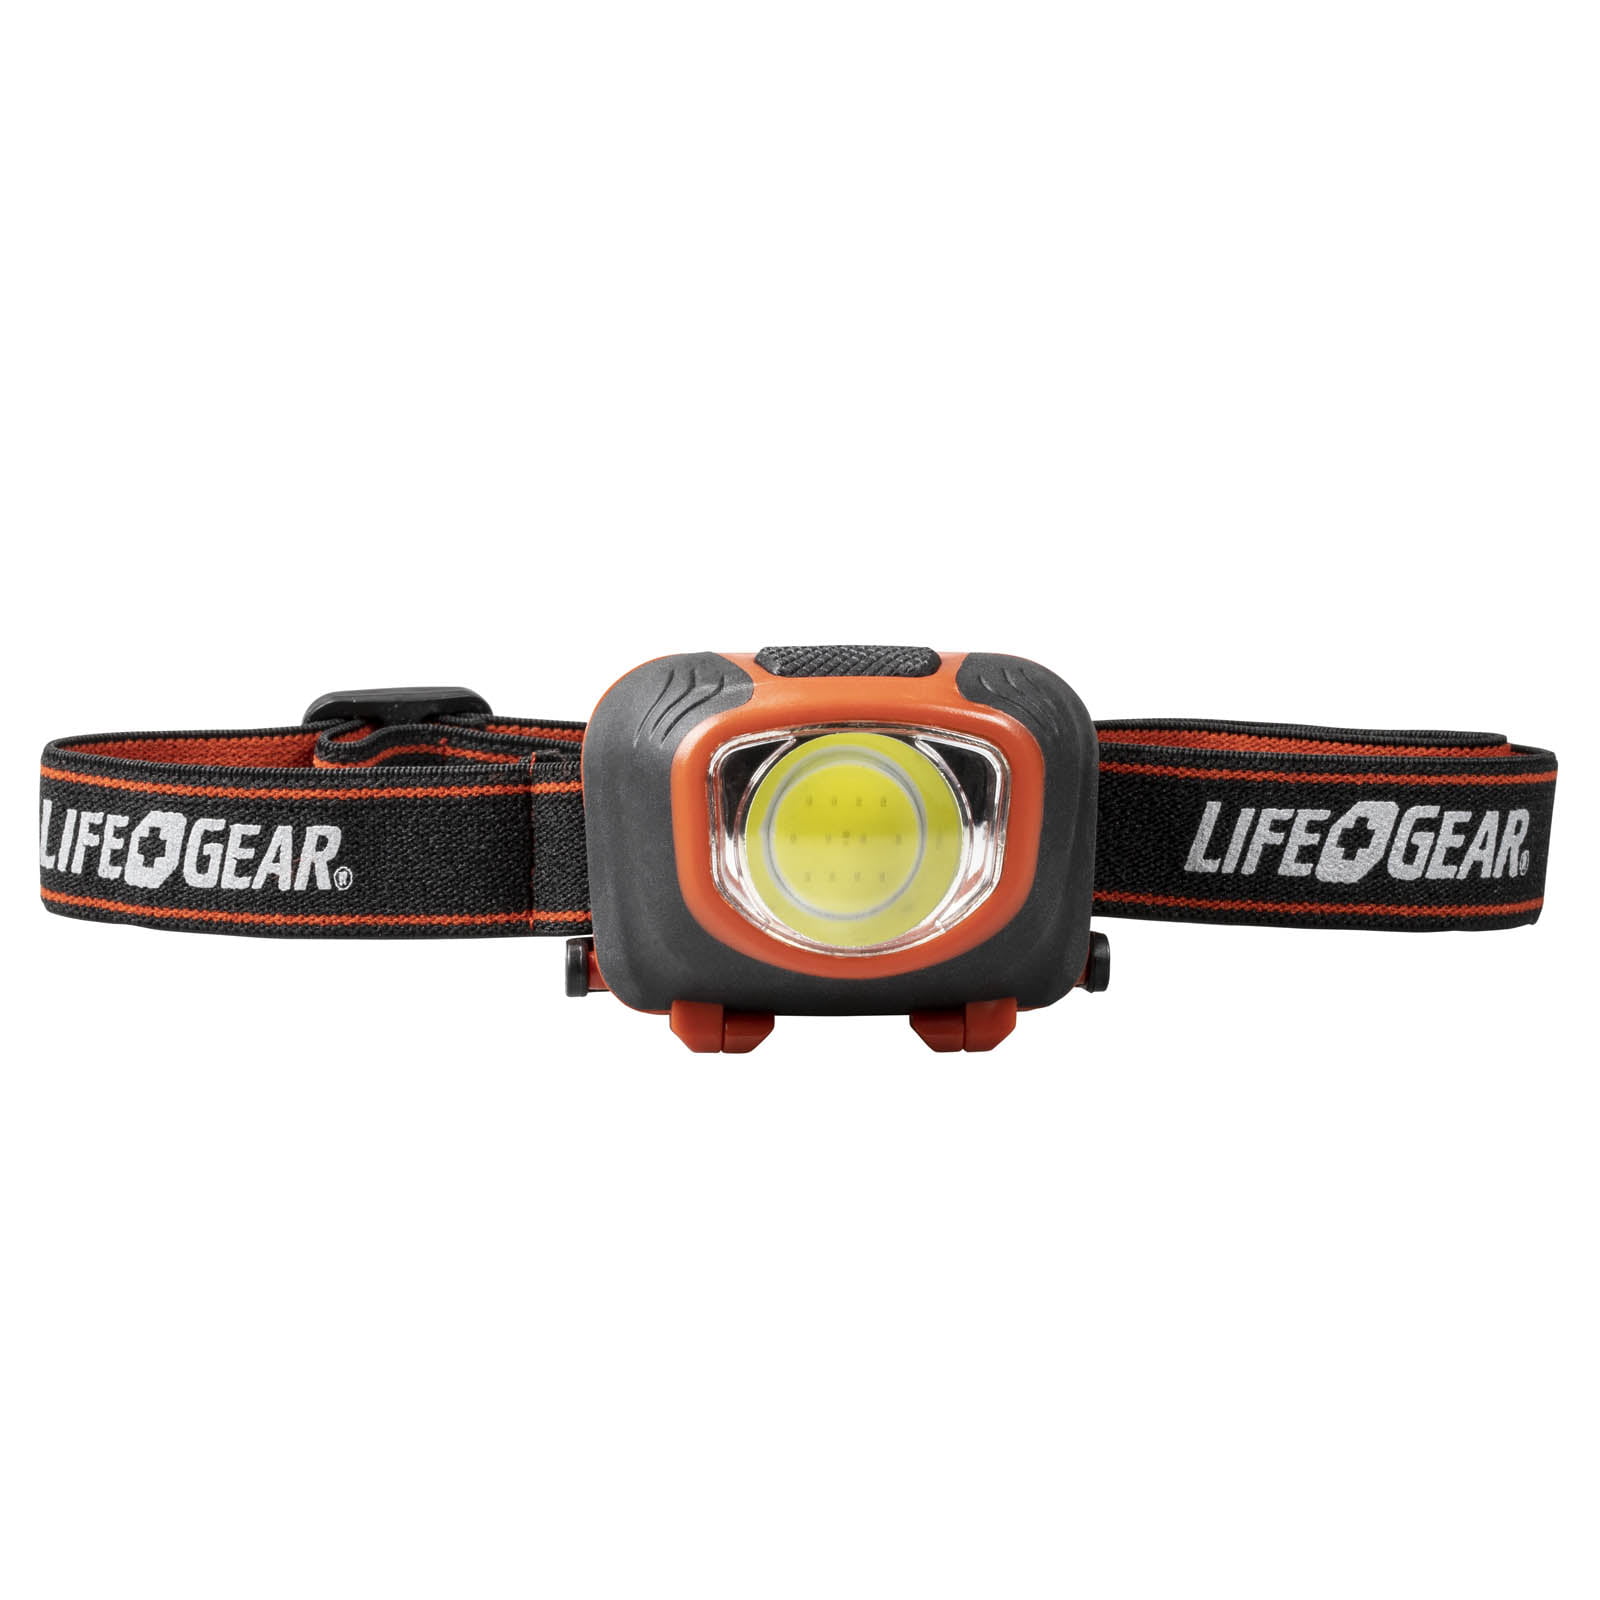 Life Gear 3900875 260 Lumens Black & Red Led Head Lamp With Aaa Battery